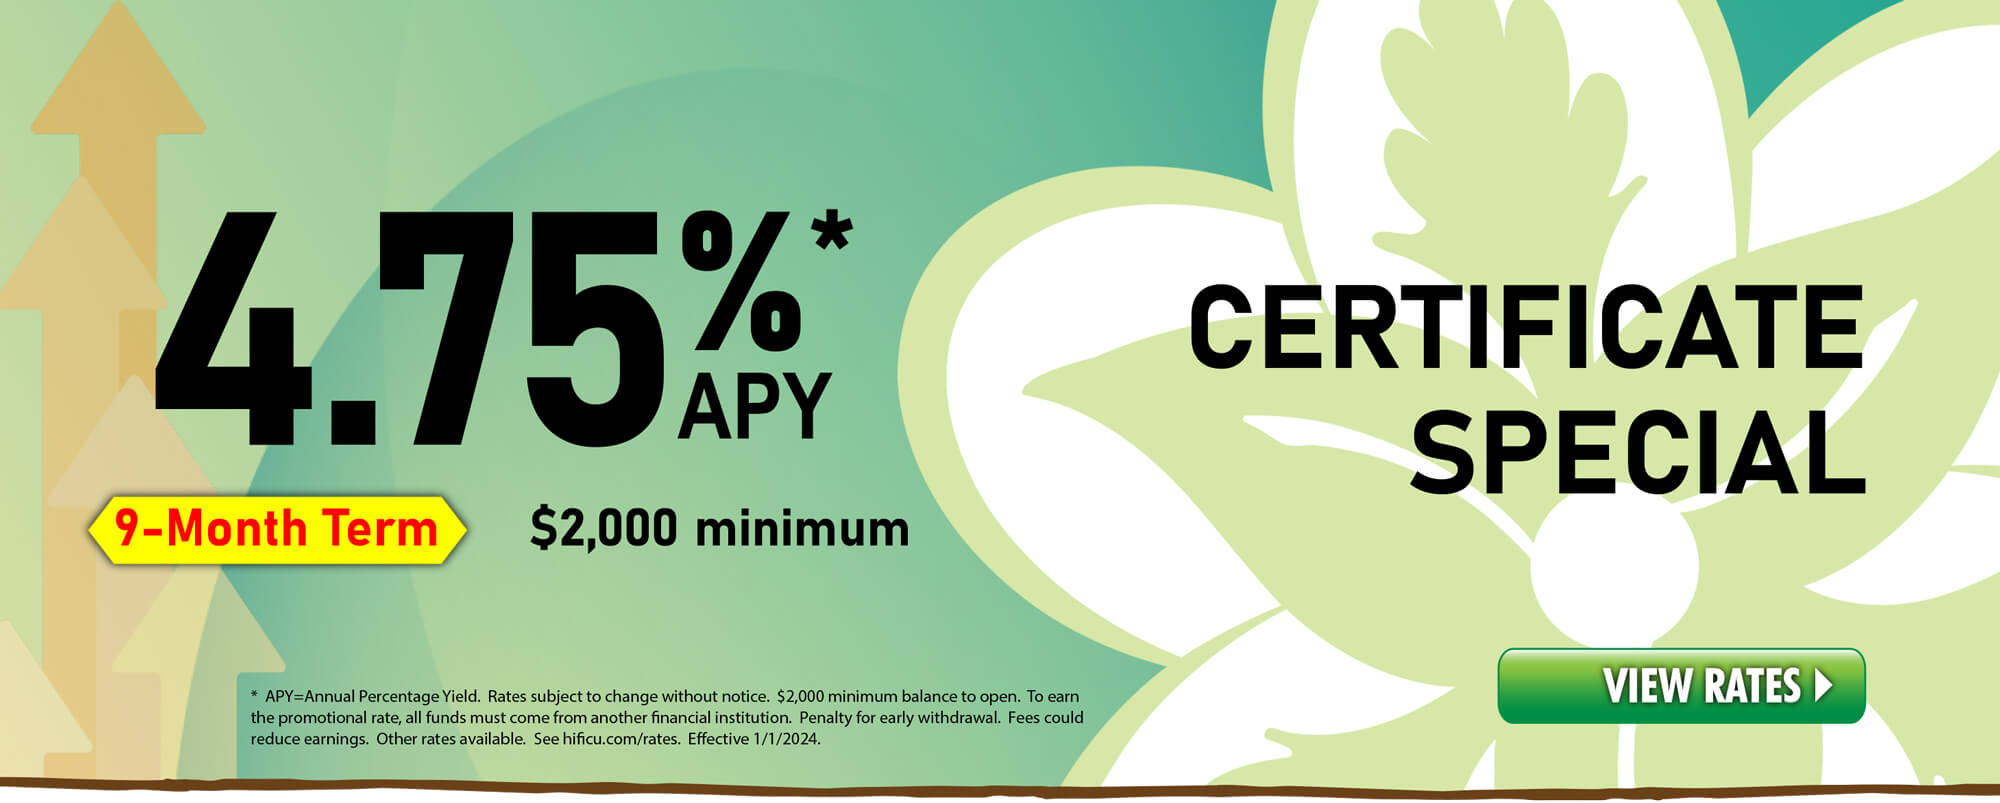 4.75% Share Certificate Special - 9-month term, $2,000 minimum balance.  Open an account today!